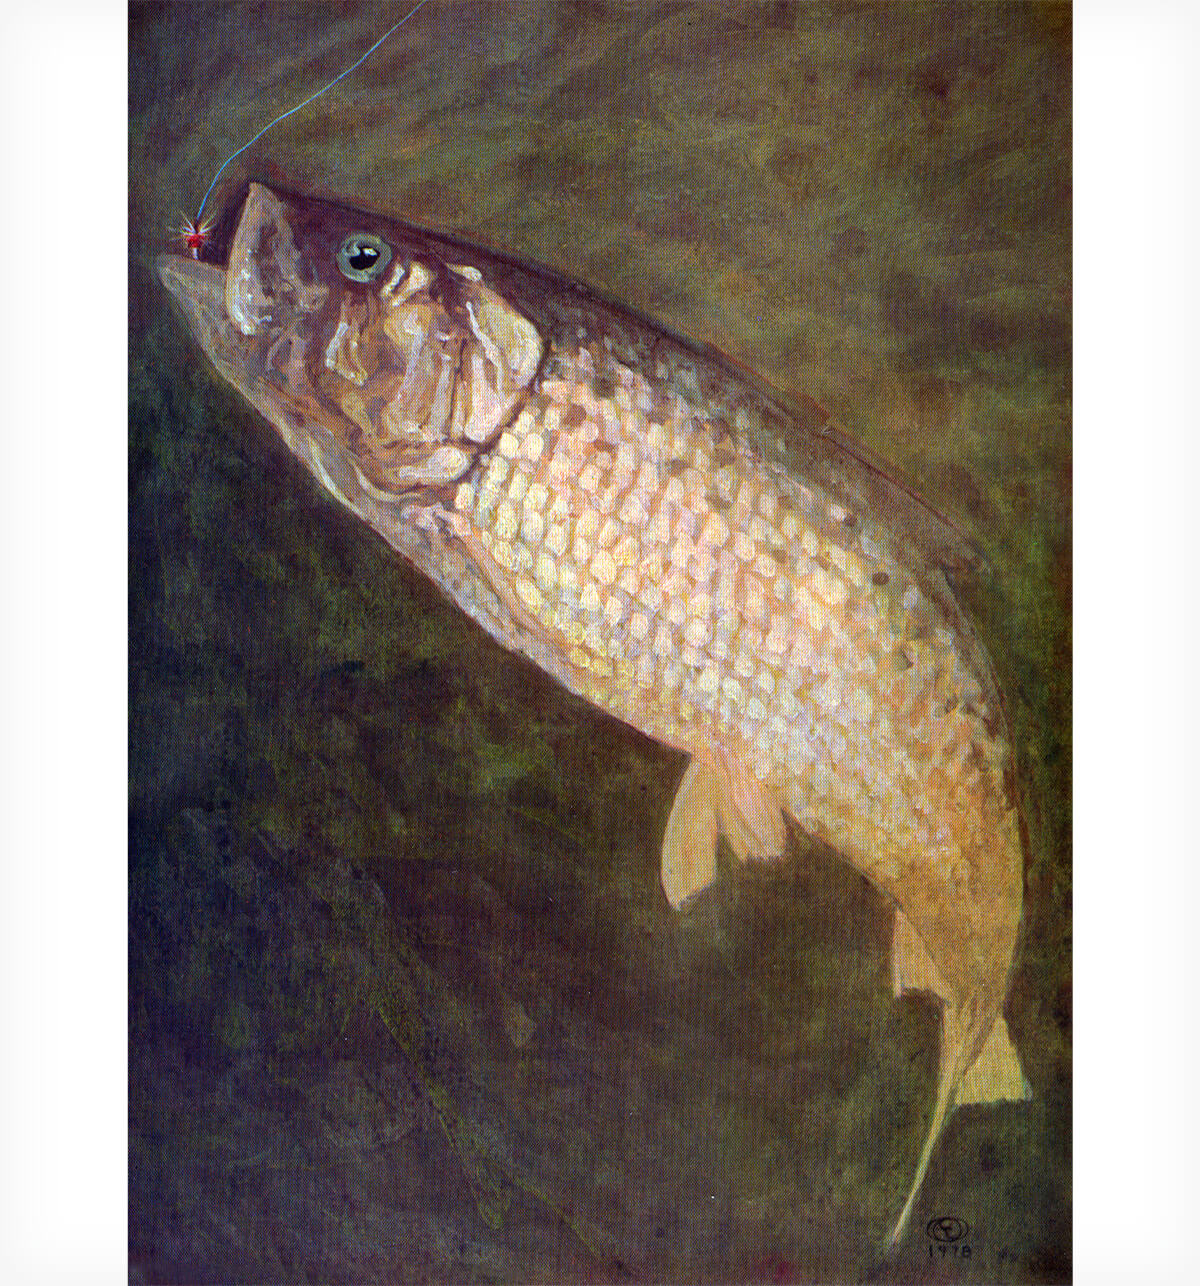 Fly Fisherman Throwback: Russell Chatham's "Shad but True"